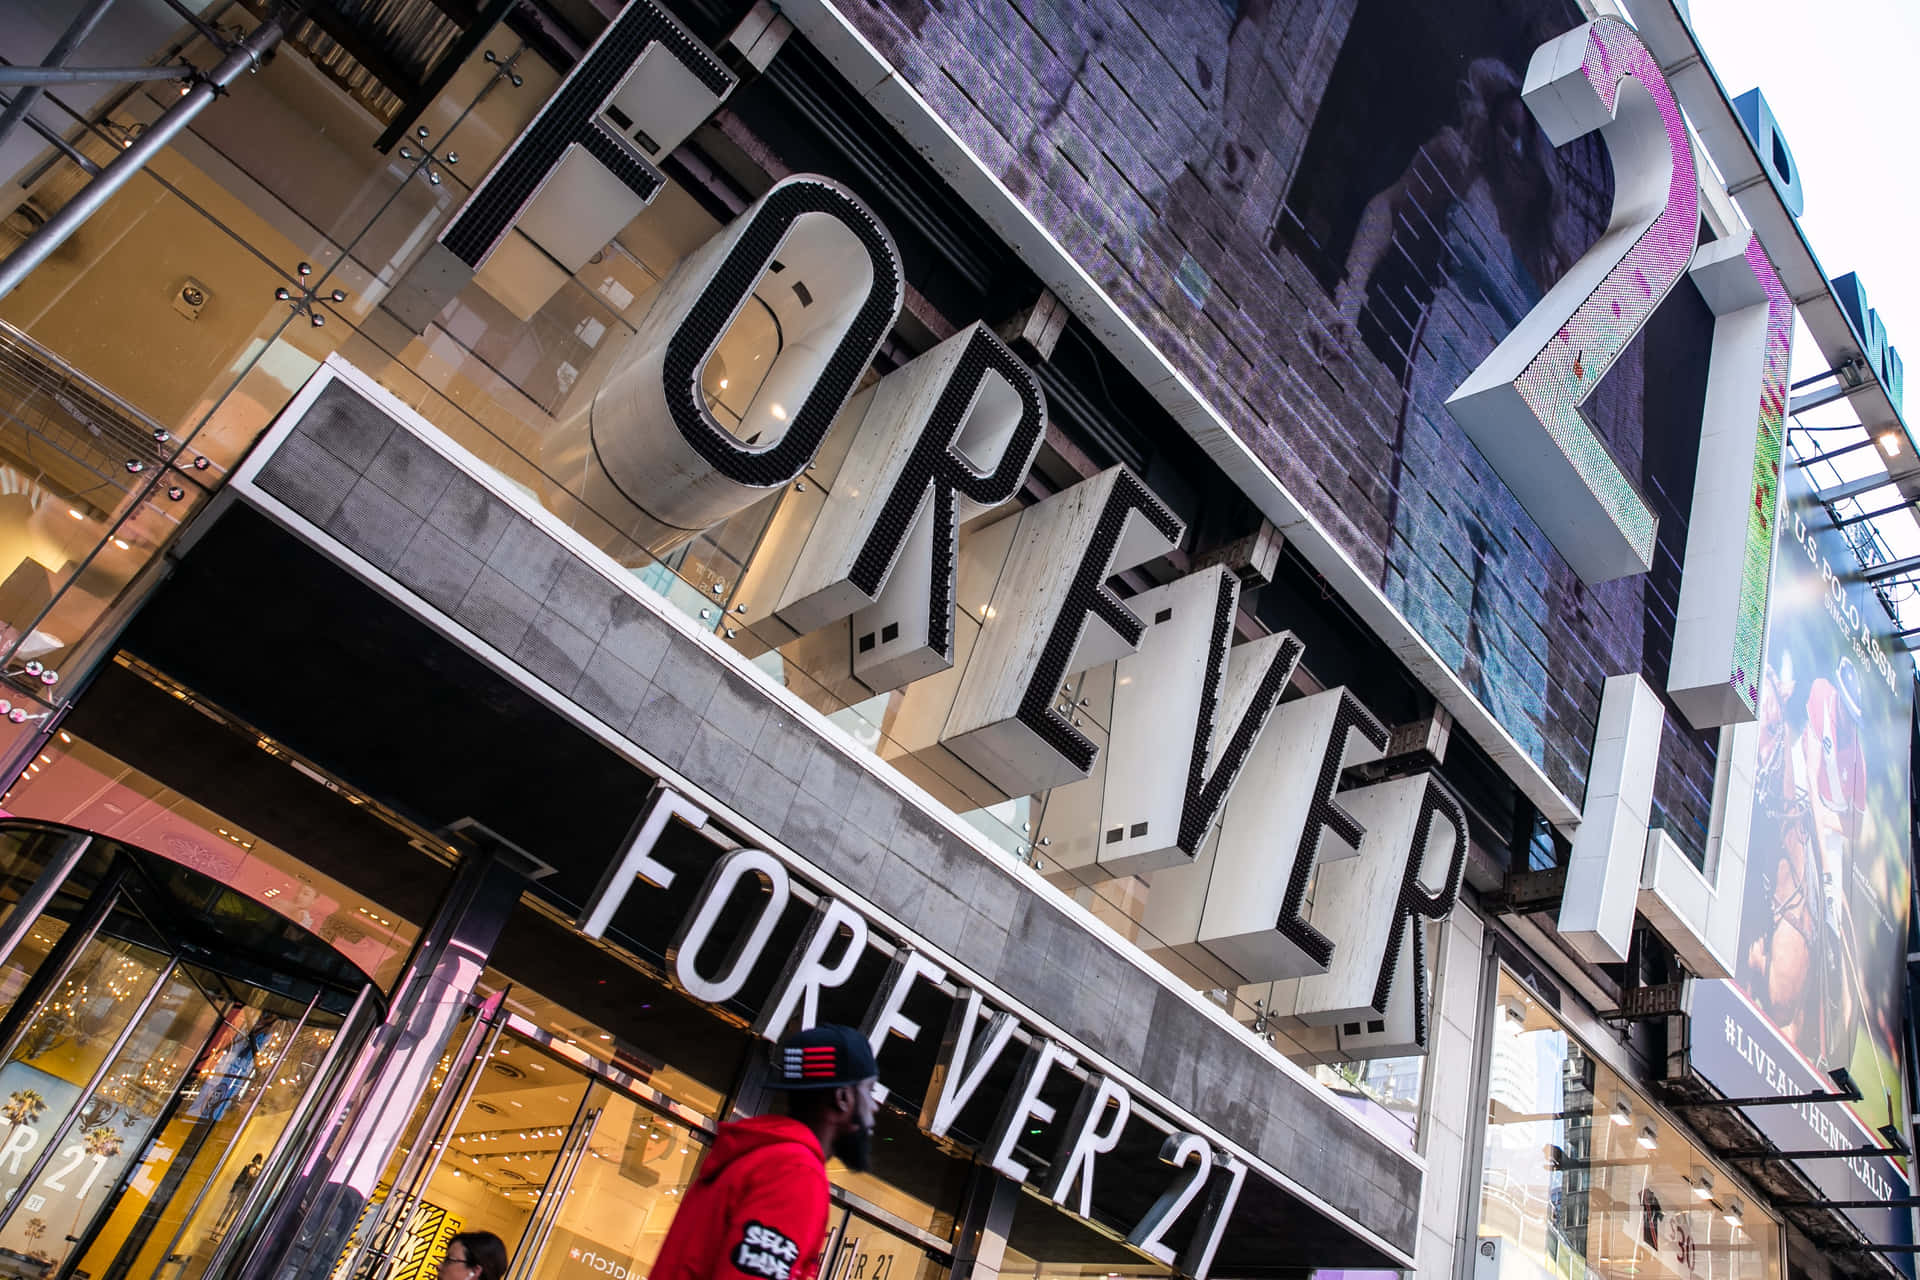 Shop for the best fashion at Forever 21!